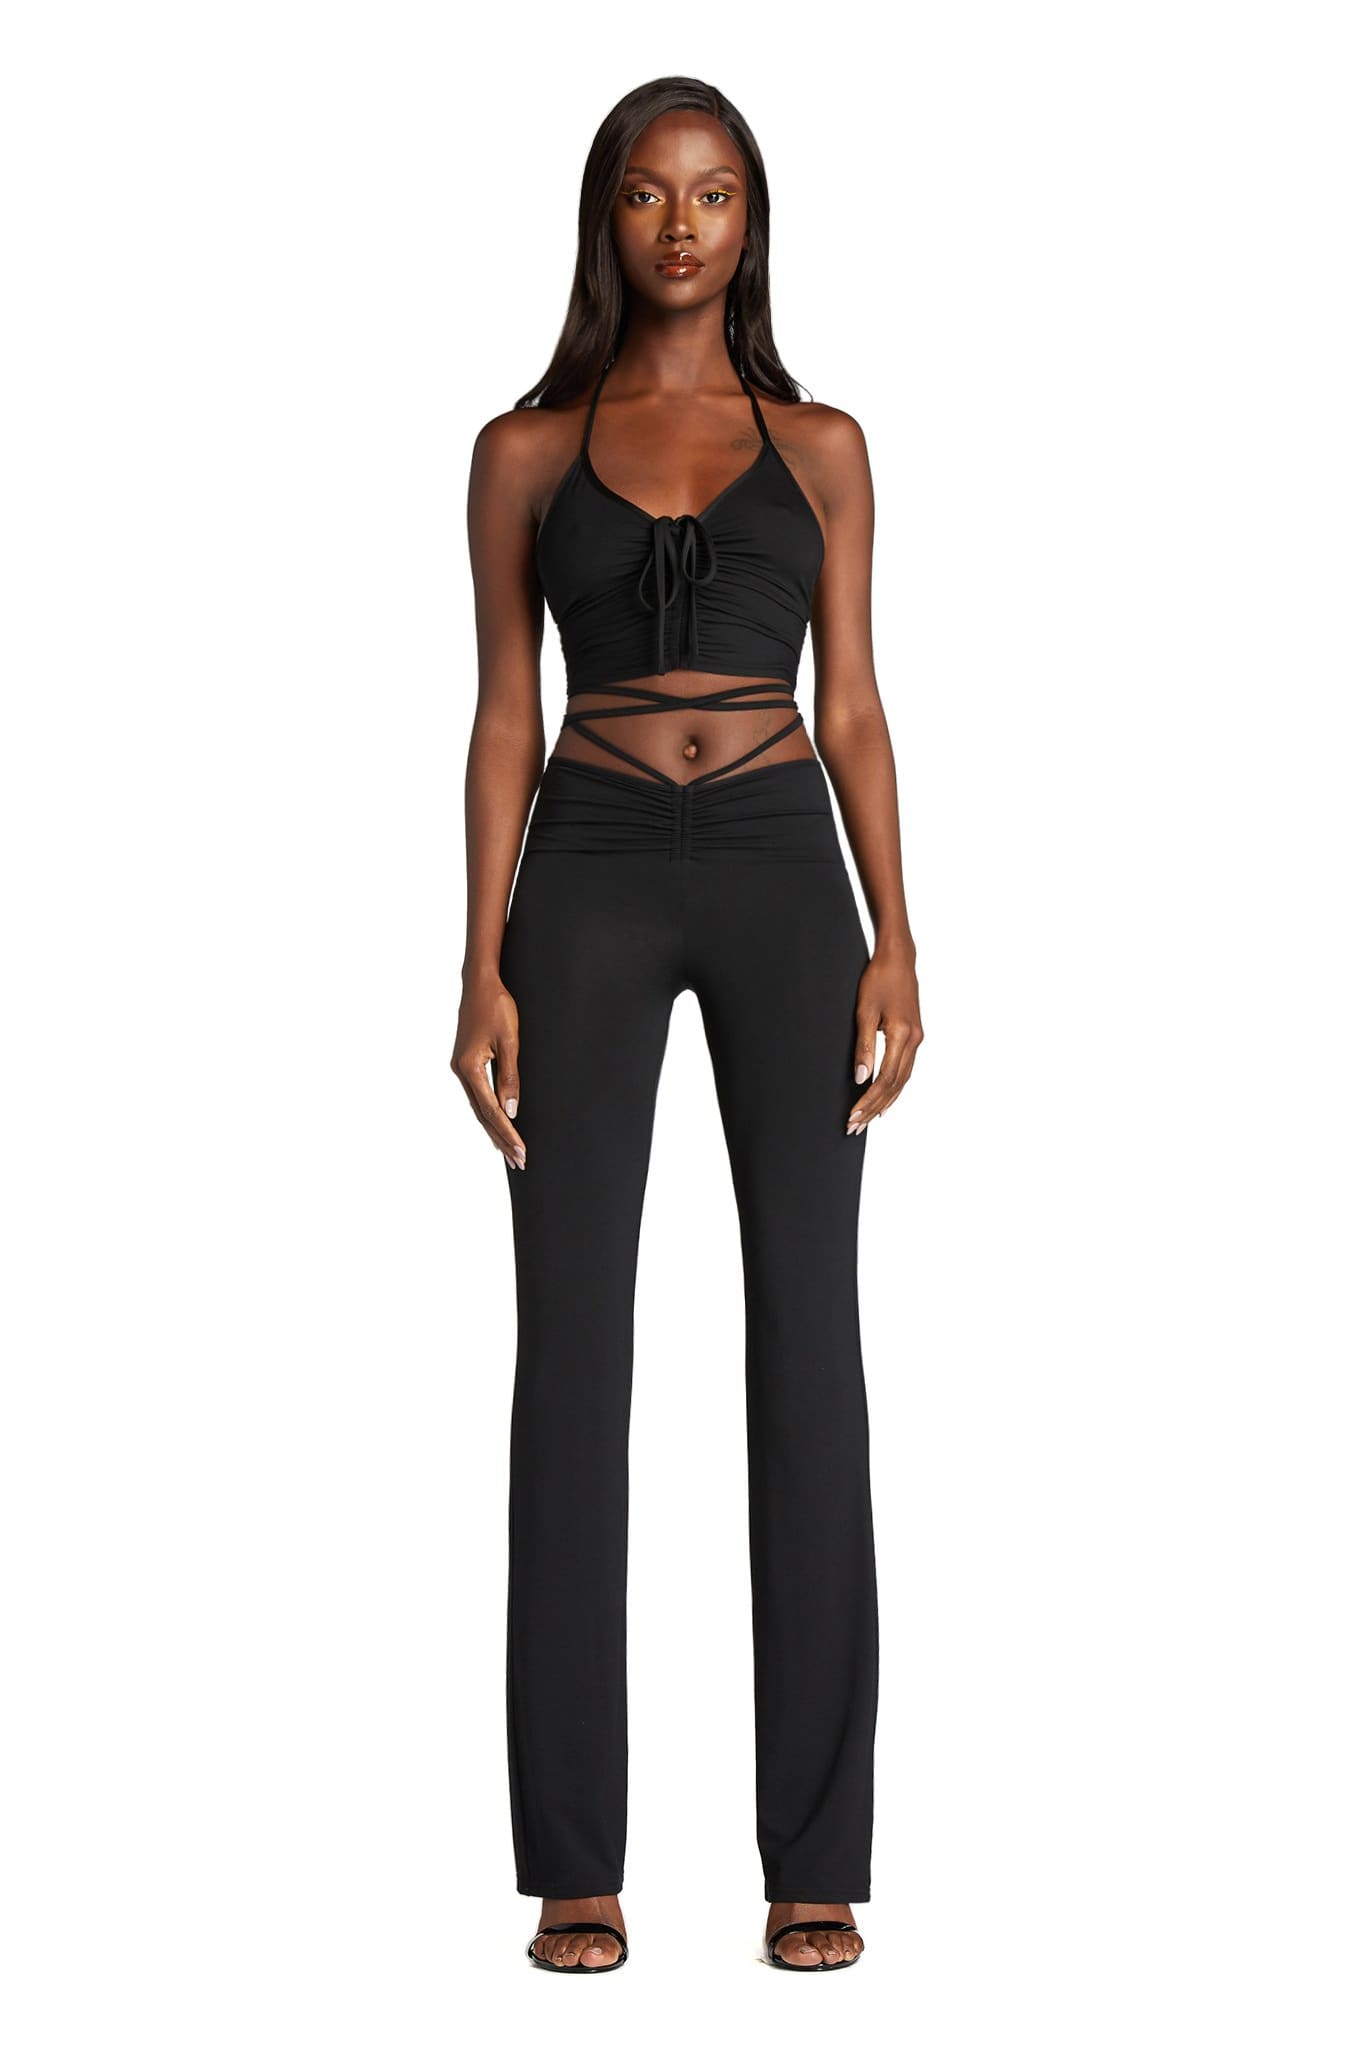 Black Lace-Up Ruched Flare Pants & Halter Crop Top